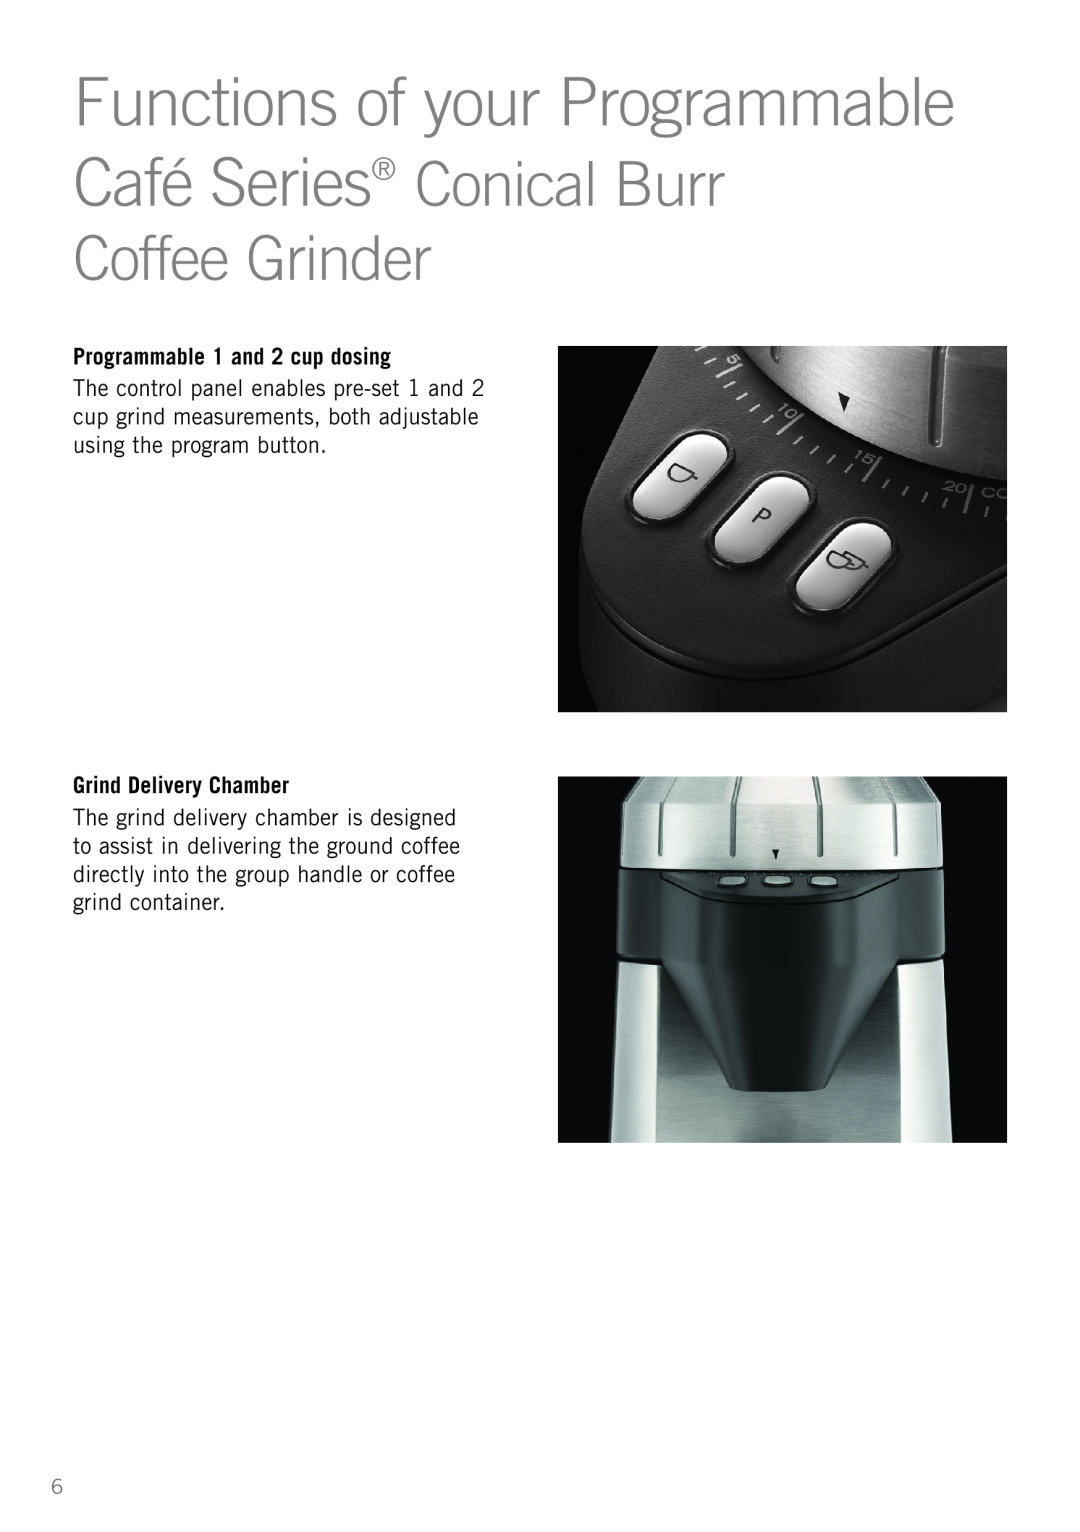 Sunbeam EM0490 Coffee Grinder, Functions of your Programmable Café Series Conical Burr, Programmable 1 and 2 cup dosing 